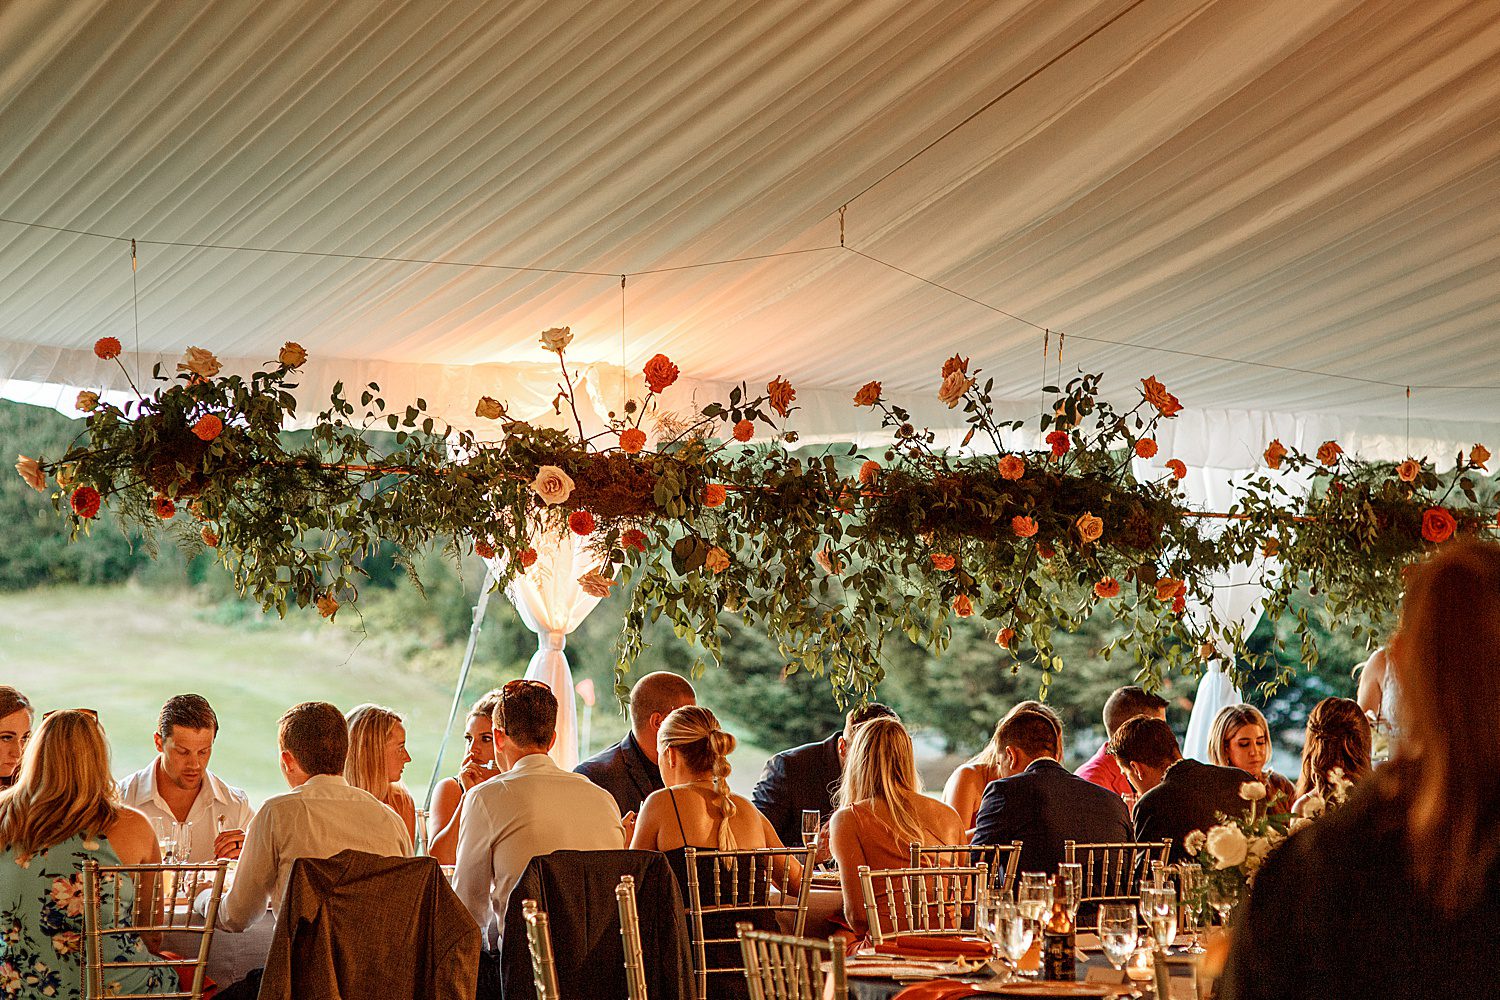 guests eating under suspended dahlias and roses